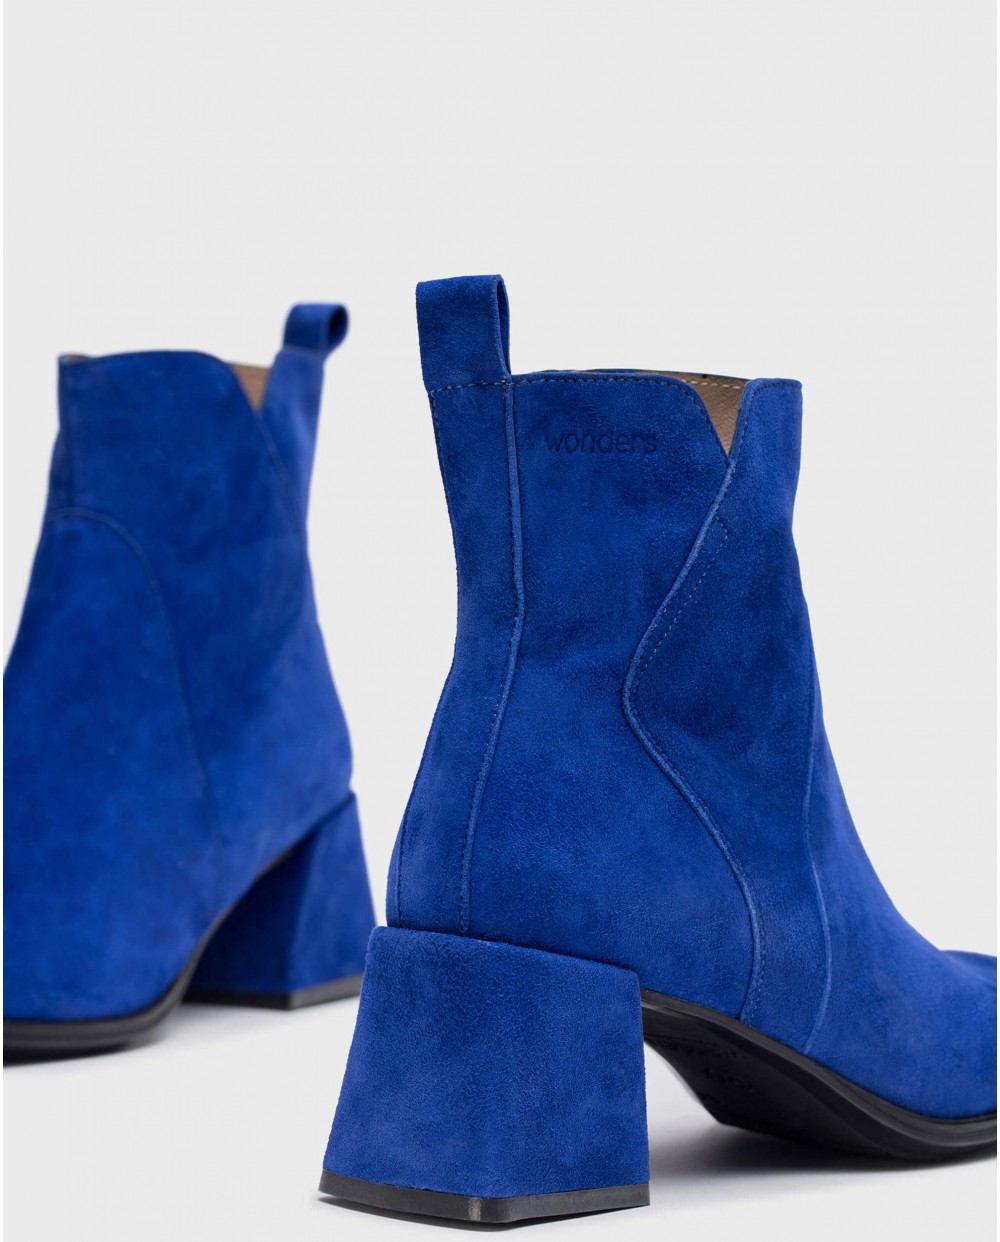 Wonders-Ankle Boots-Blue MARINE ankle boot